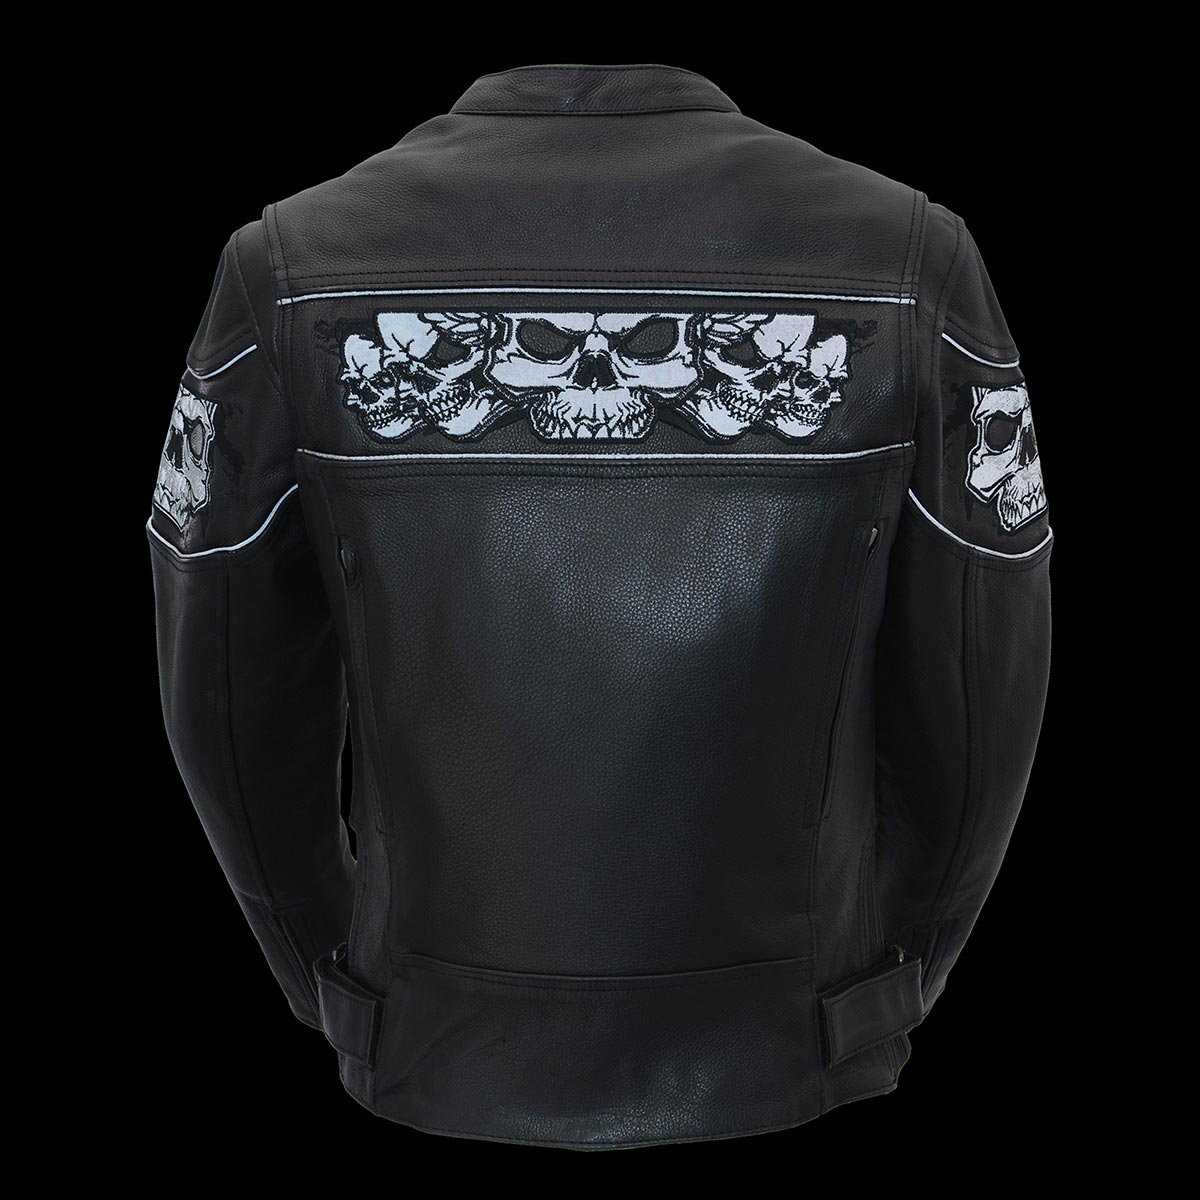 Milwaukee Leather MLL2540 Women's Crossover Black Leather Scooter Jacket Reflective Skull Graphic